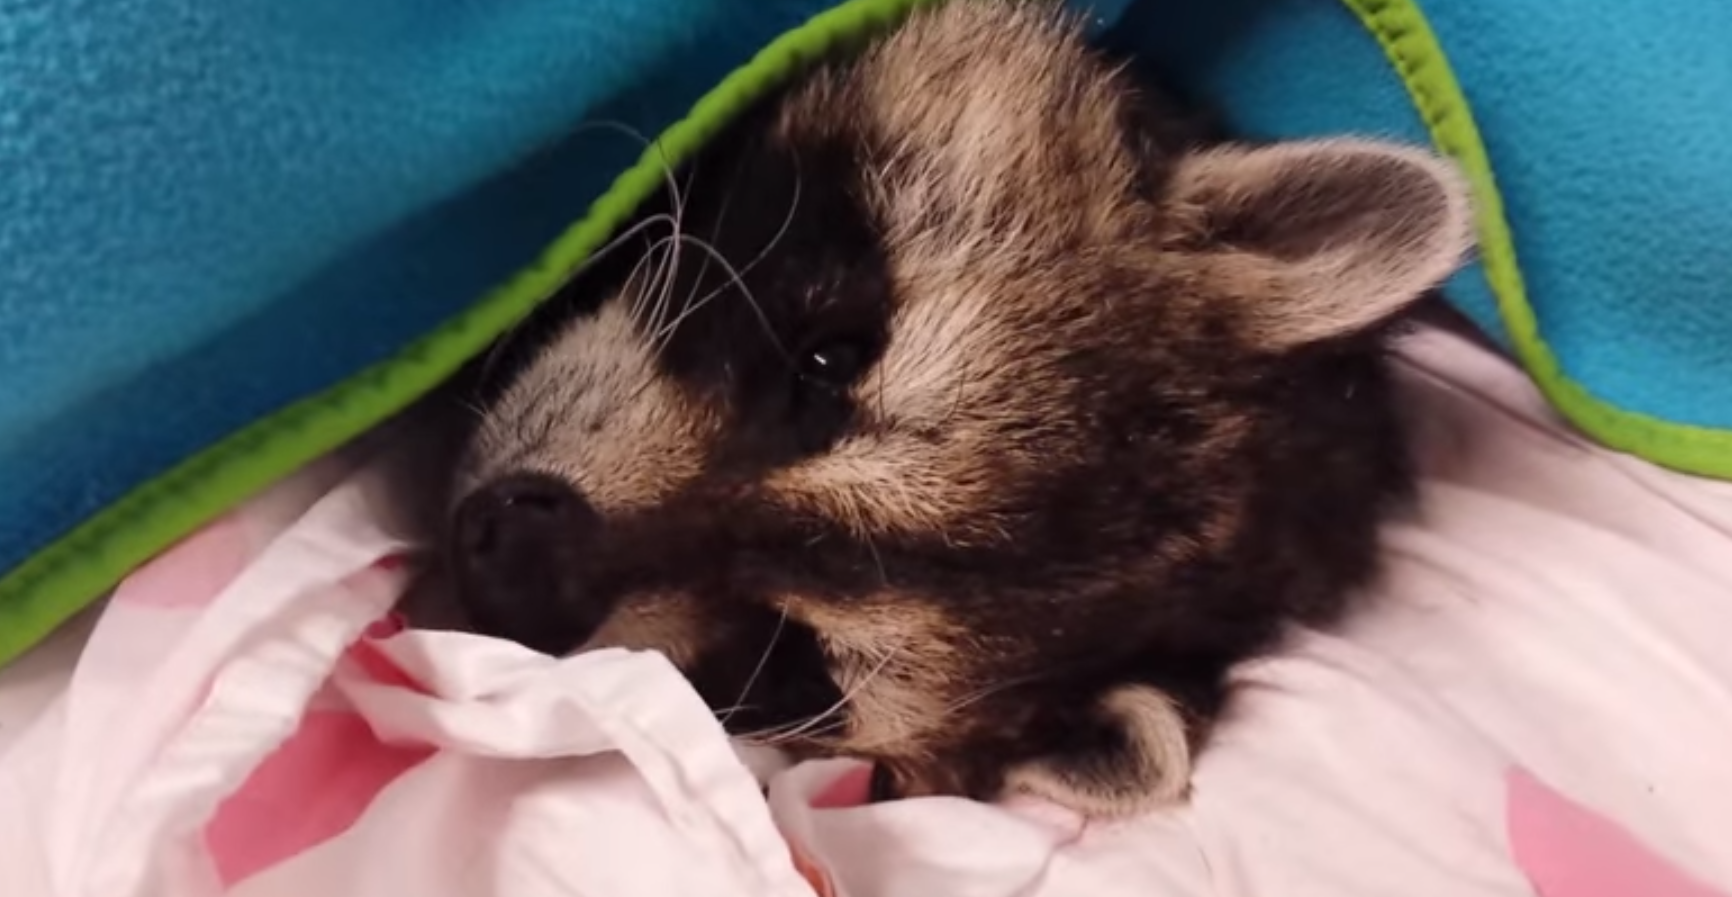 This raccoon appears to be allergic to mornings